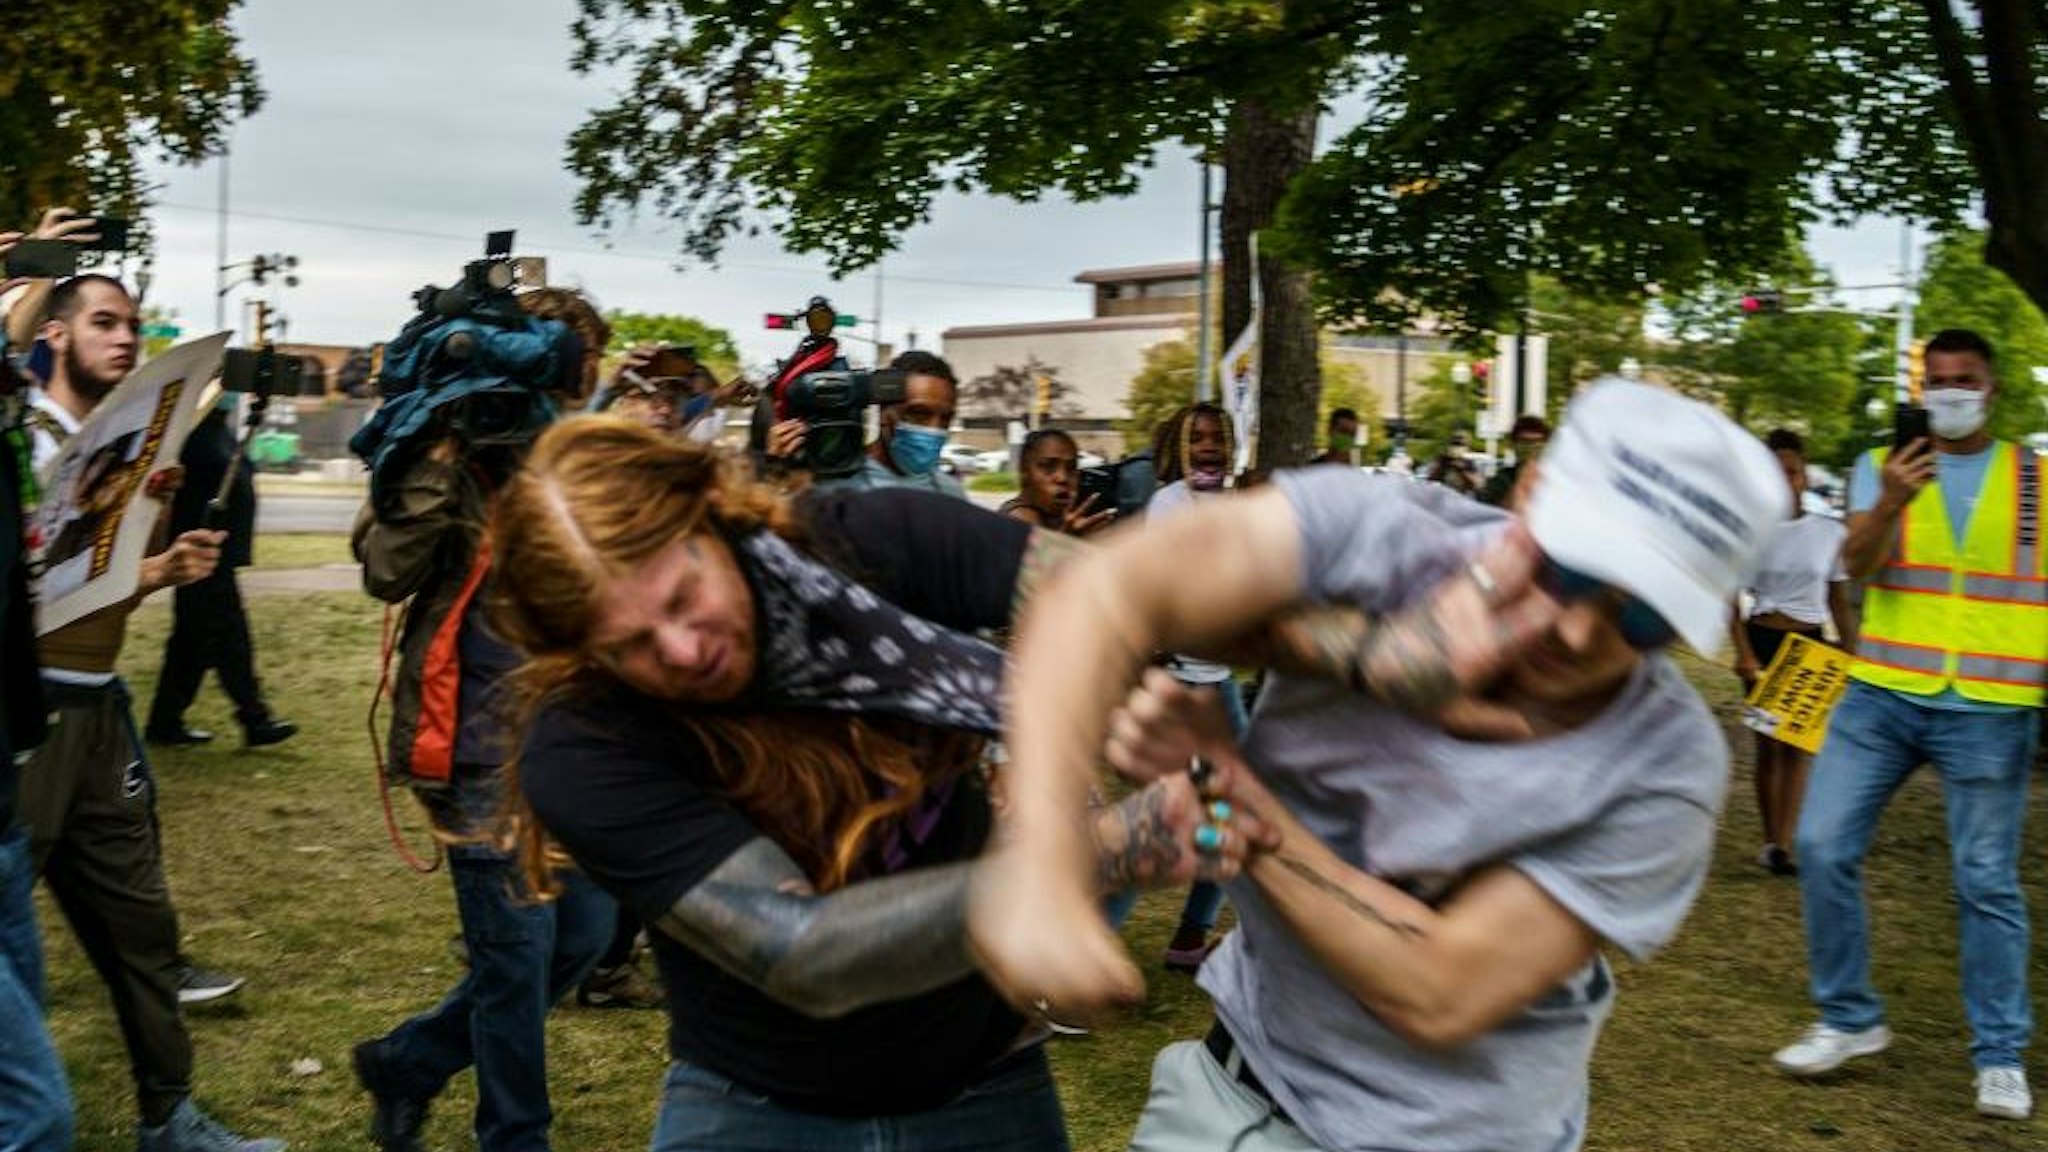 A protester scuffles with a Trump supporter (R) in Kenosha, Wisconsin, on September 1, 2020, amid ongoing demonstrations after the shooting by police of Jacob Blake. - President Donald Trump on September 1 took his tough law and order message to Kenosha, the latest US city roiled by the police shooting of a black man, as he branded recent anti-racism protests acts of "domestic terror" by violent mobs. (Photo by Kerem Yucel / AFP) (Photo by KEREM YUCEL/AFP via Getty Images)